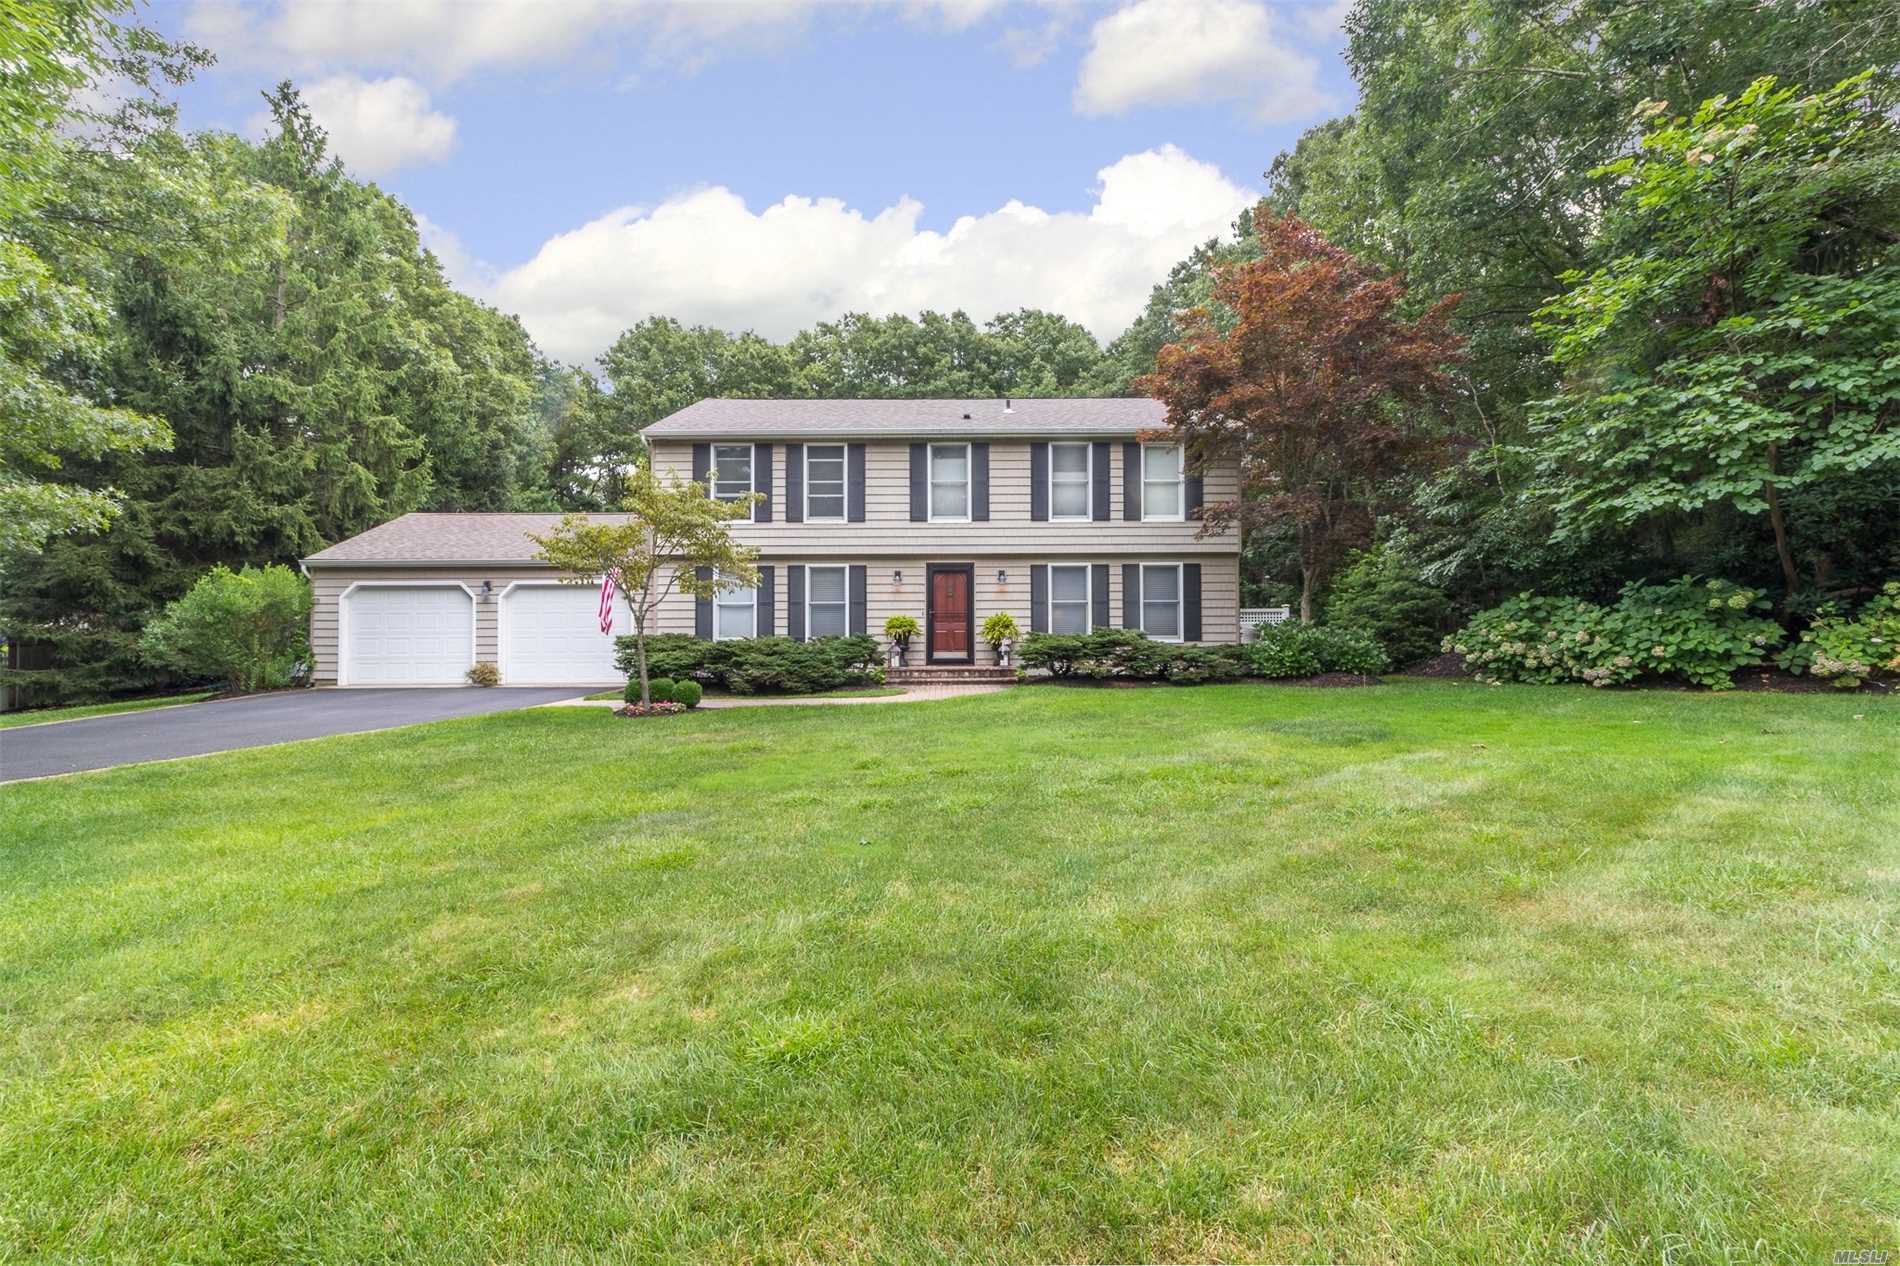 This Pristine 4 Bd/2.5Bth Colonial In The Quiet Fairways Development Boasts An Updated Kitchen W/Granite Counters &Ss Appliances That Opens To Dinette&Family Rm W/Fireplace, Wood Floors, Generously Sized Master Suite W/Full Closet, Walk In Closet&Newly Renovated Bath. Outdoors You&rsquo;ll Enjoy Entertaining On The Large Deck, Relaxing Near The Firepit, Cooling Off In The Crystal Clear Pool, Or Just Taking In The Lush Mature Grounds. Meticulously Maintained! Less Than 2 Miles To Both Lie&Sunrise Hwy.